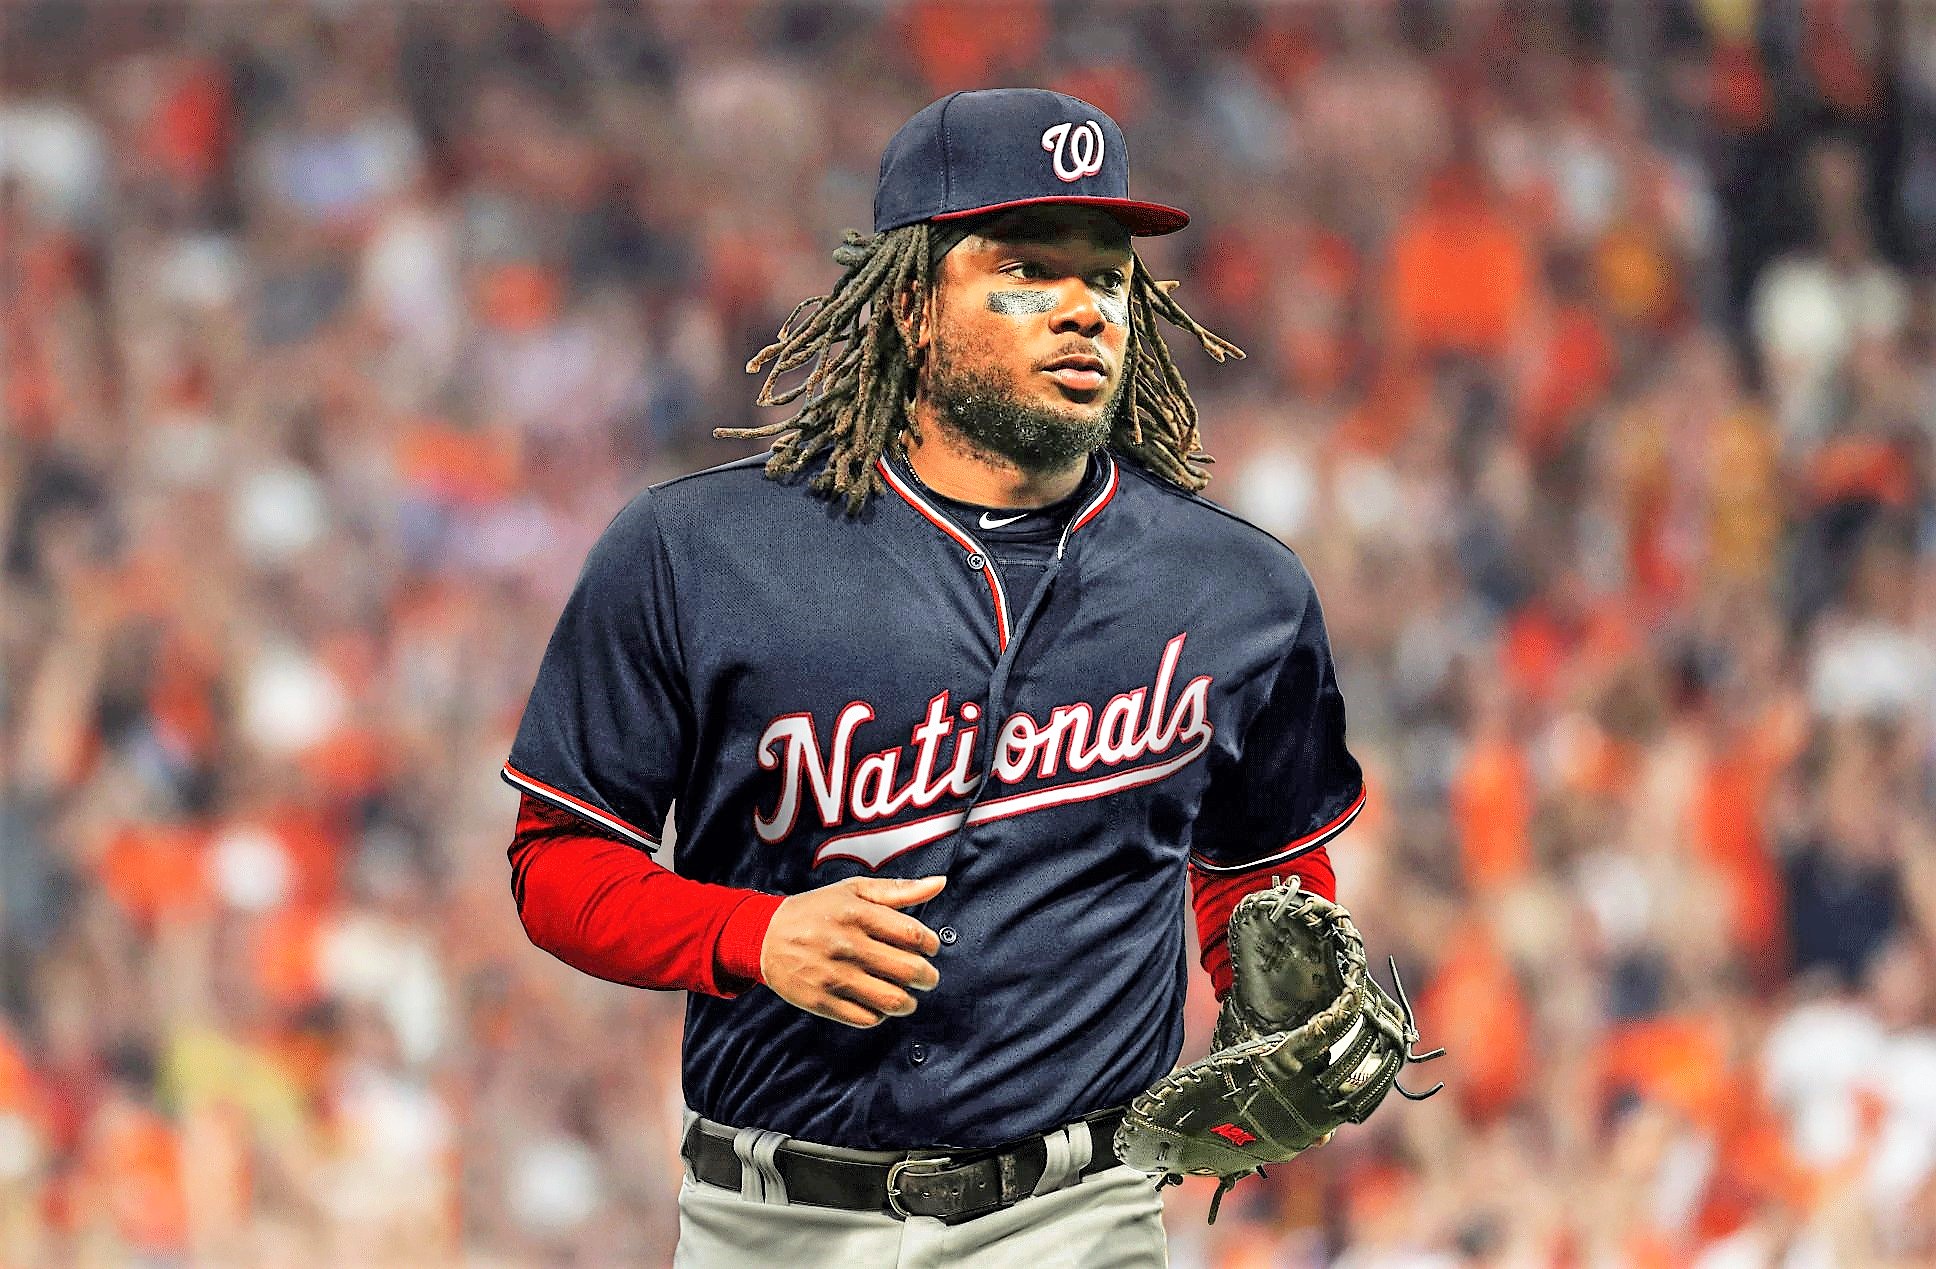 With the Josh Bell acquisition, the Nats starters are coming into